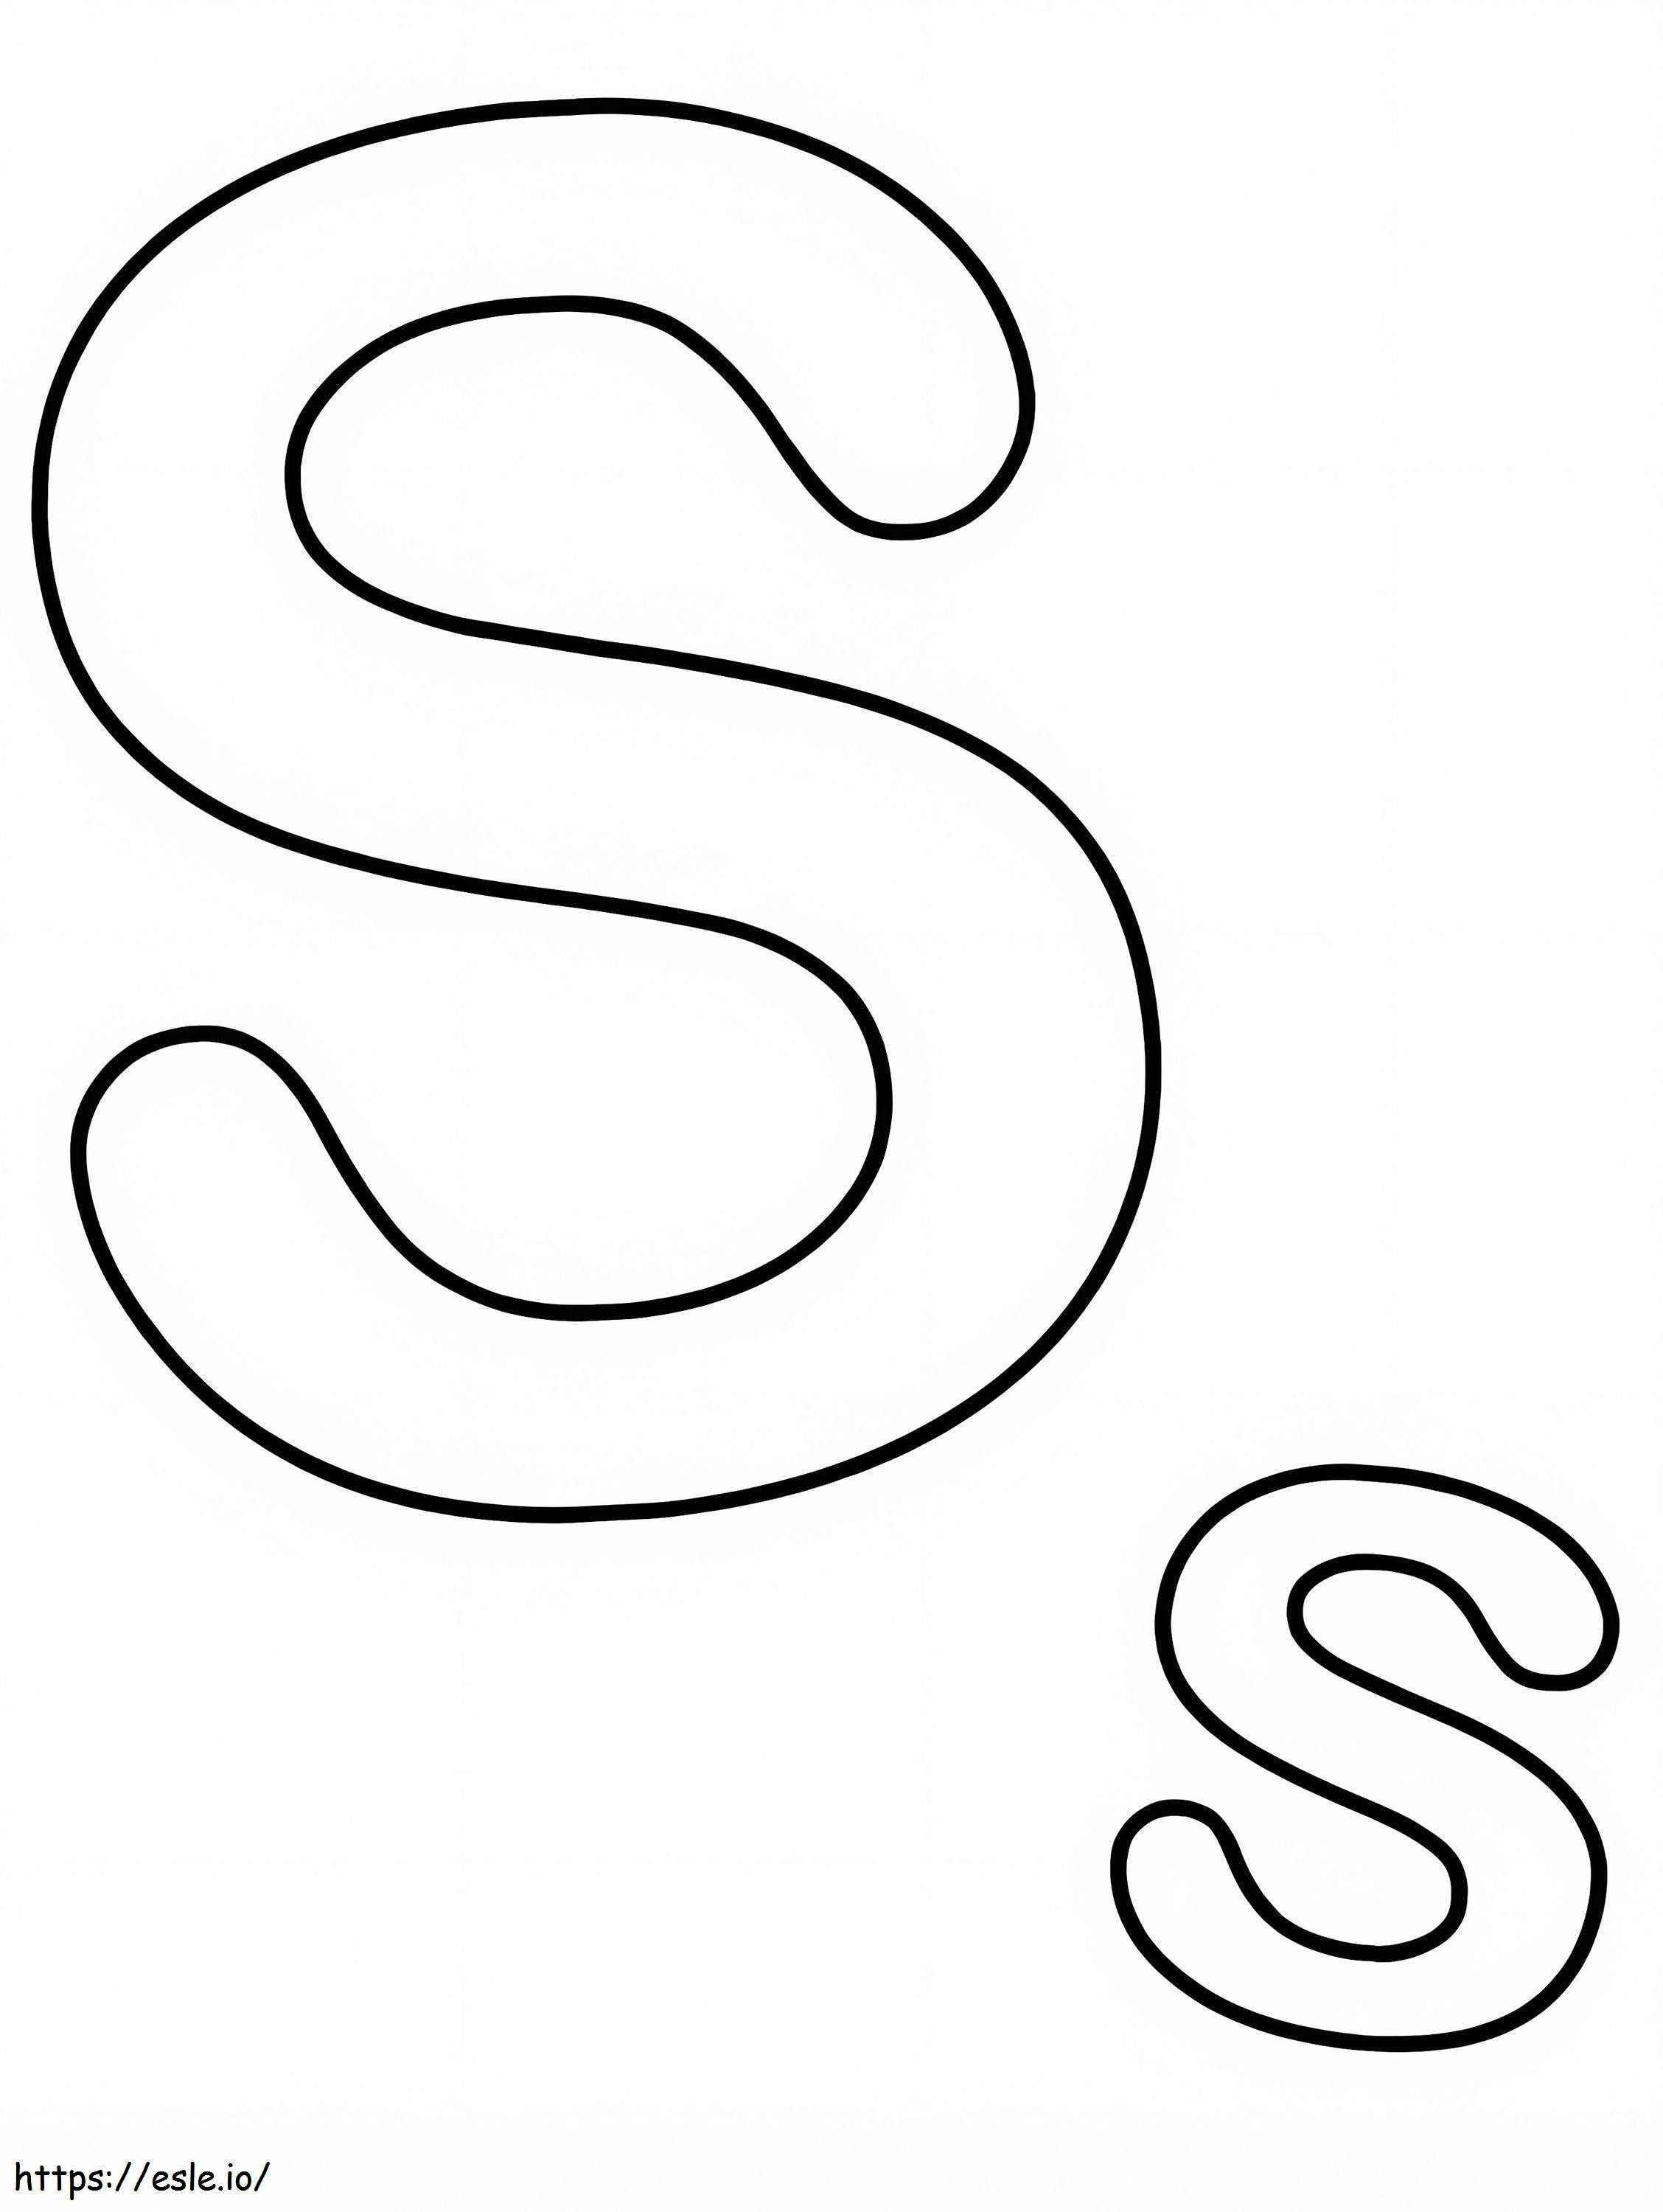 Simple Letter S coloring page